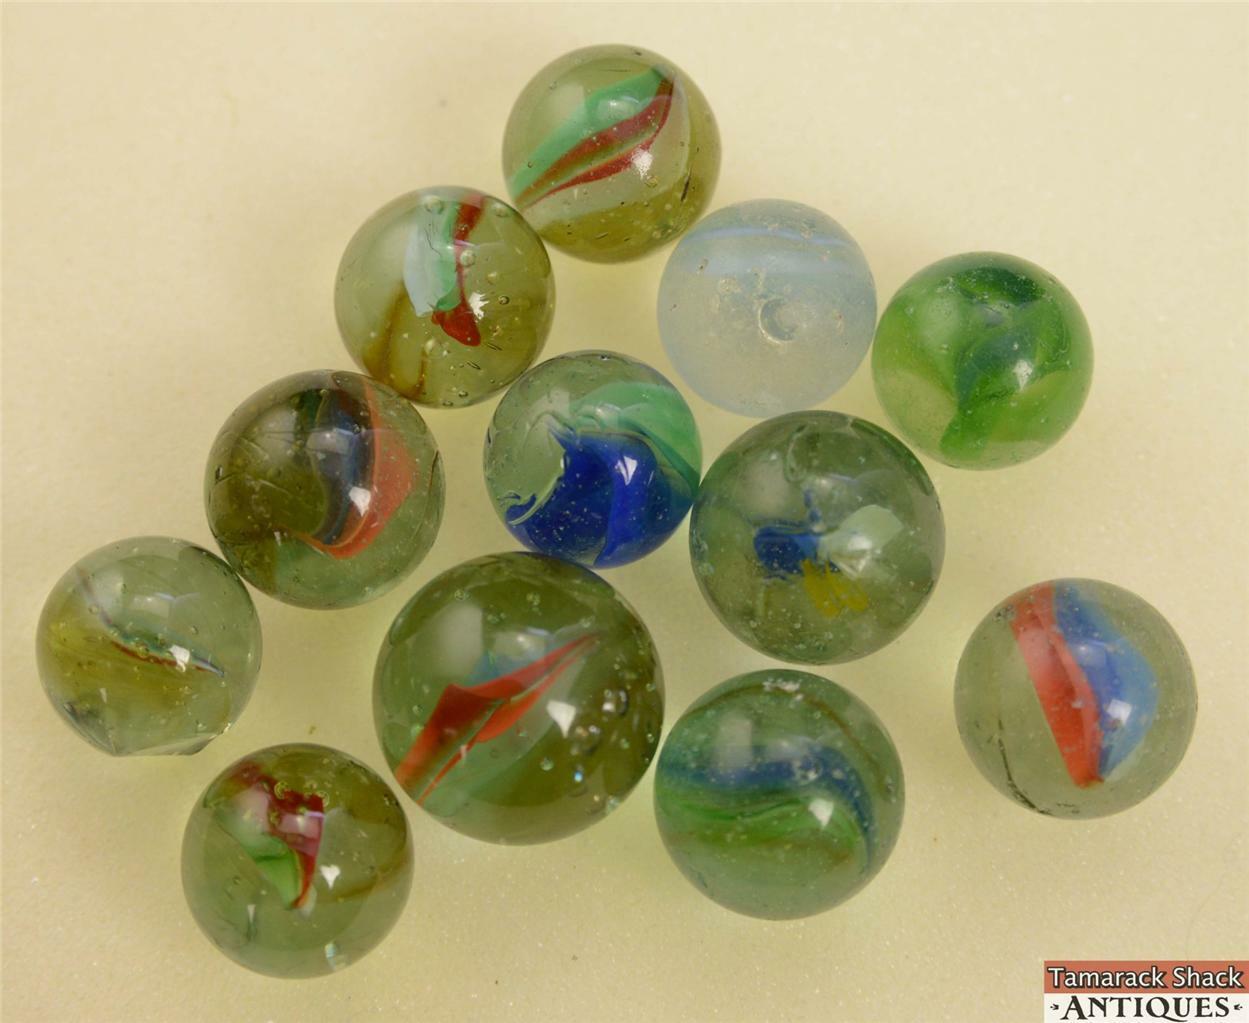 Vintage CATS EYE BAG OF 100 Glass Marbles 2 SHOOTERS Never Opened 